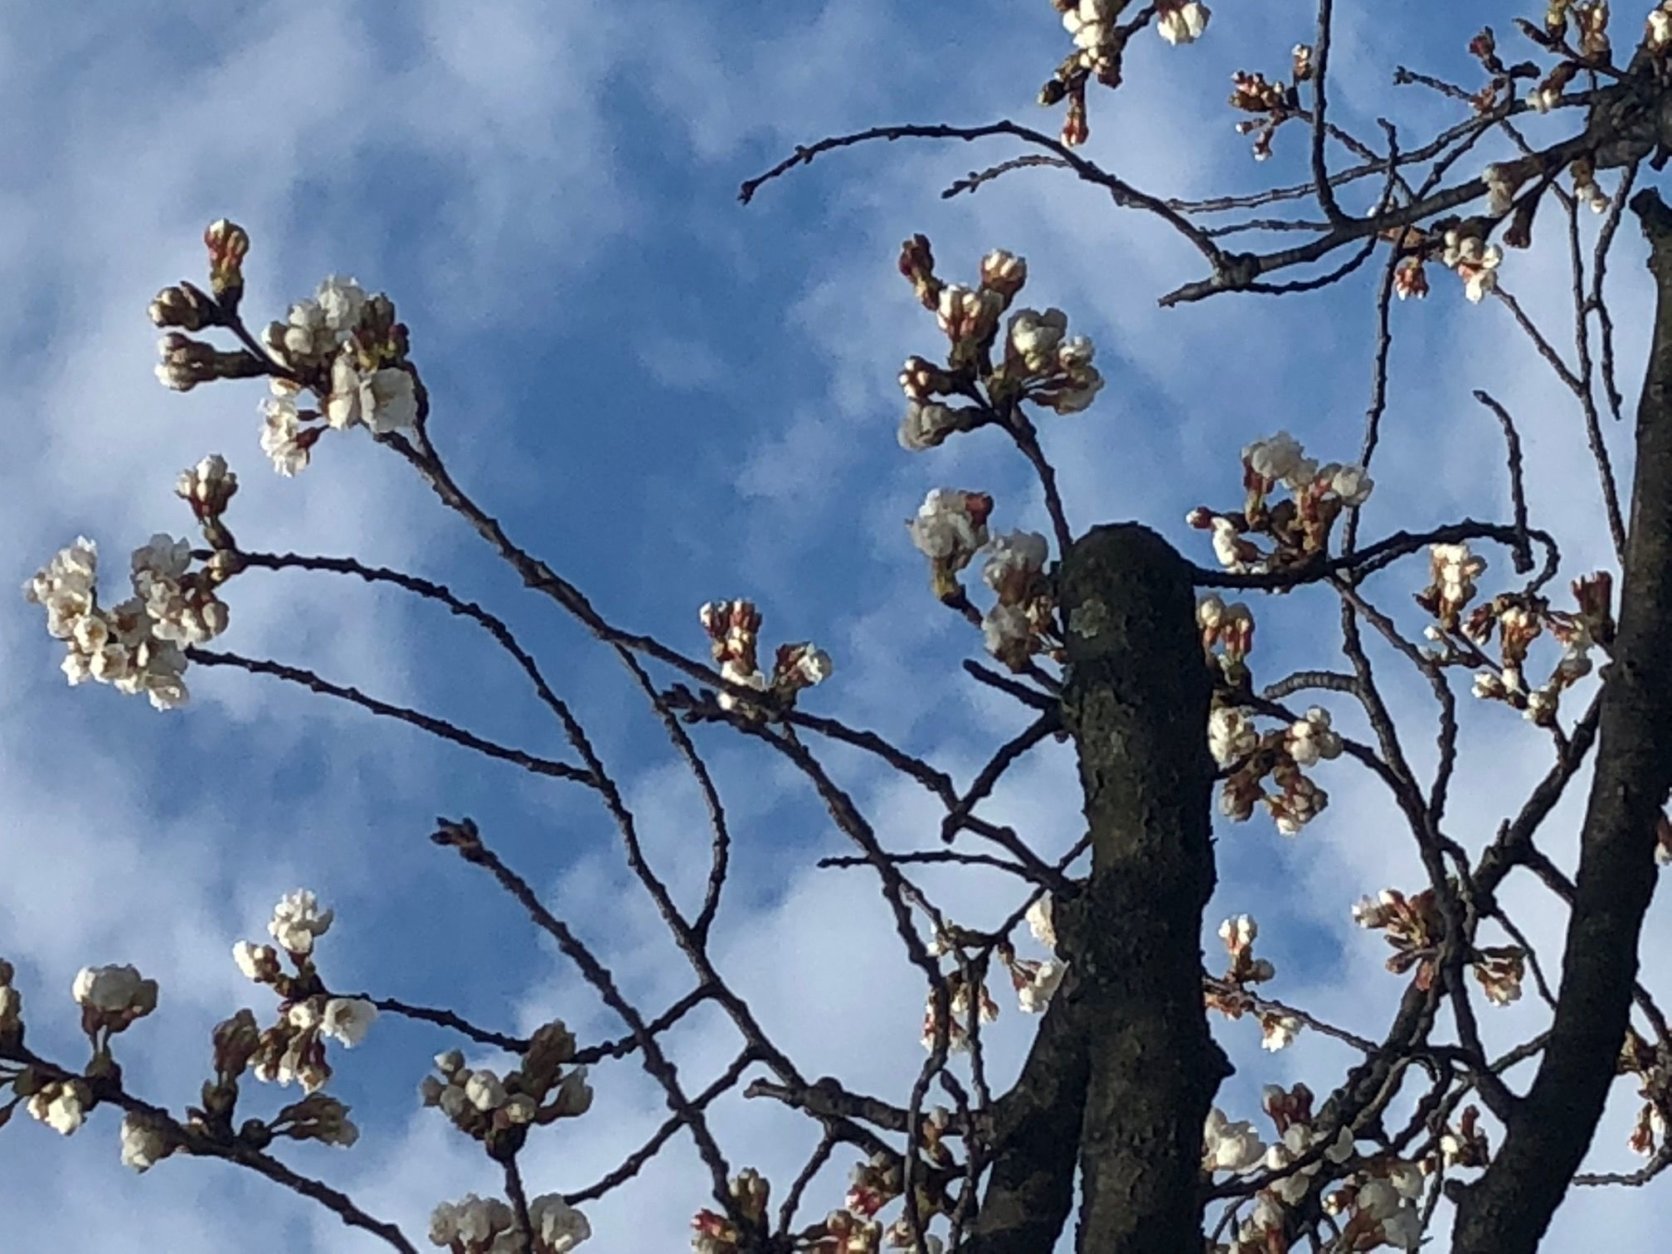 "We're a couple warm days from reaching full bloom for the 'indicator' tree. Once the 'indicator' tree is in blossom, that tells us we're about a week away from Peak Bloom," National Mall Spokesman Mike Litterst said. (Courtesy NPS/Mike Litterst)